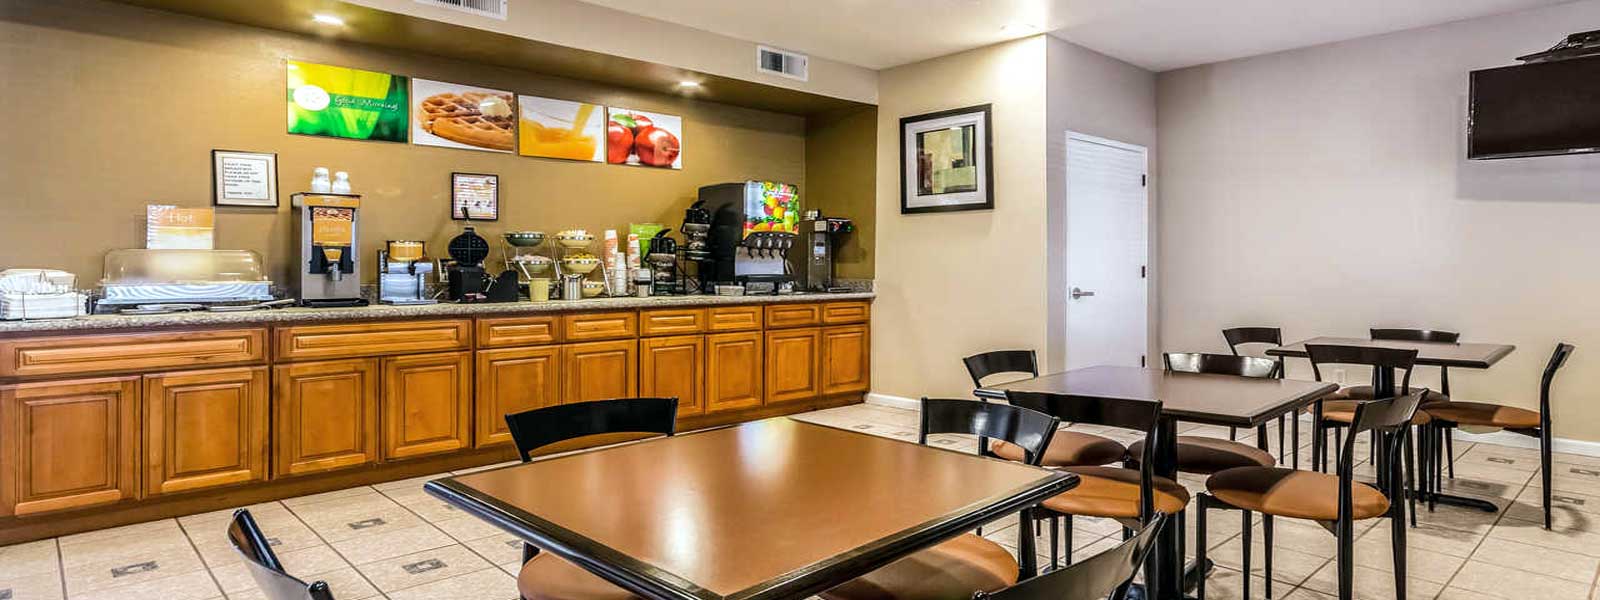 Hotels in Fresno Great Rates Trip Advisor